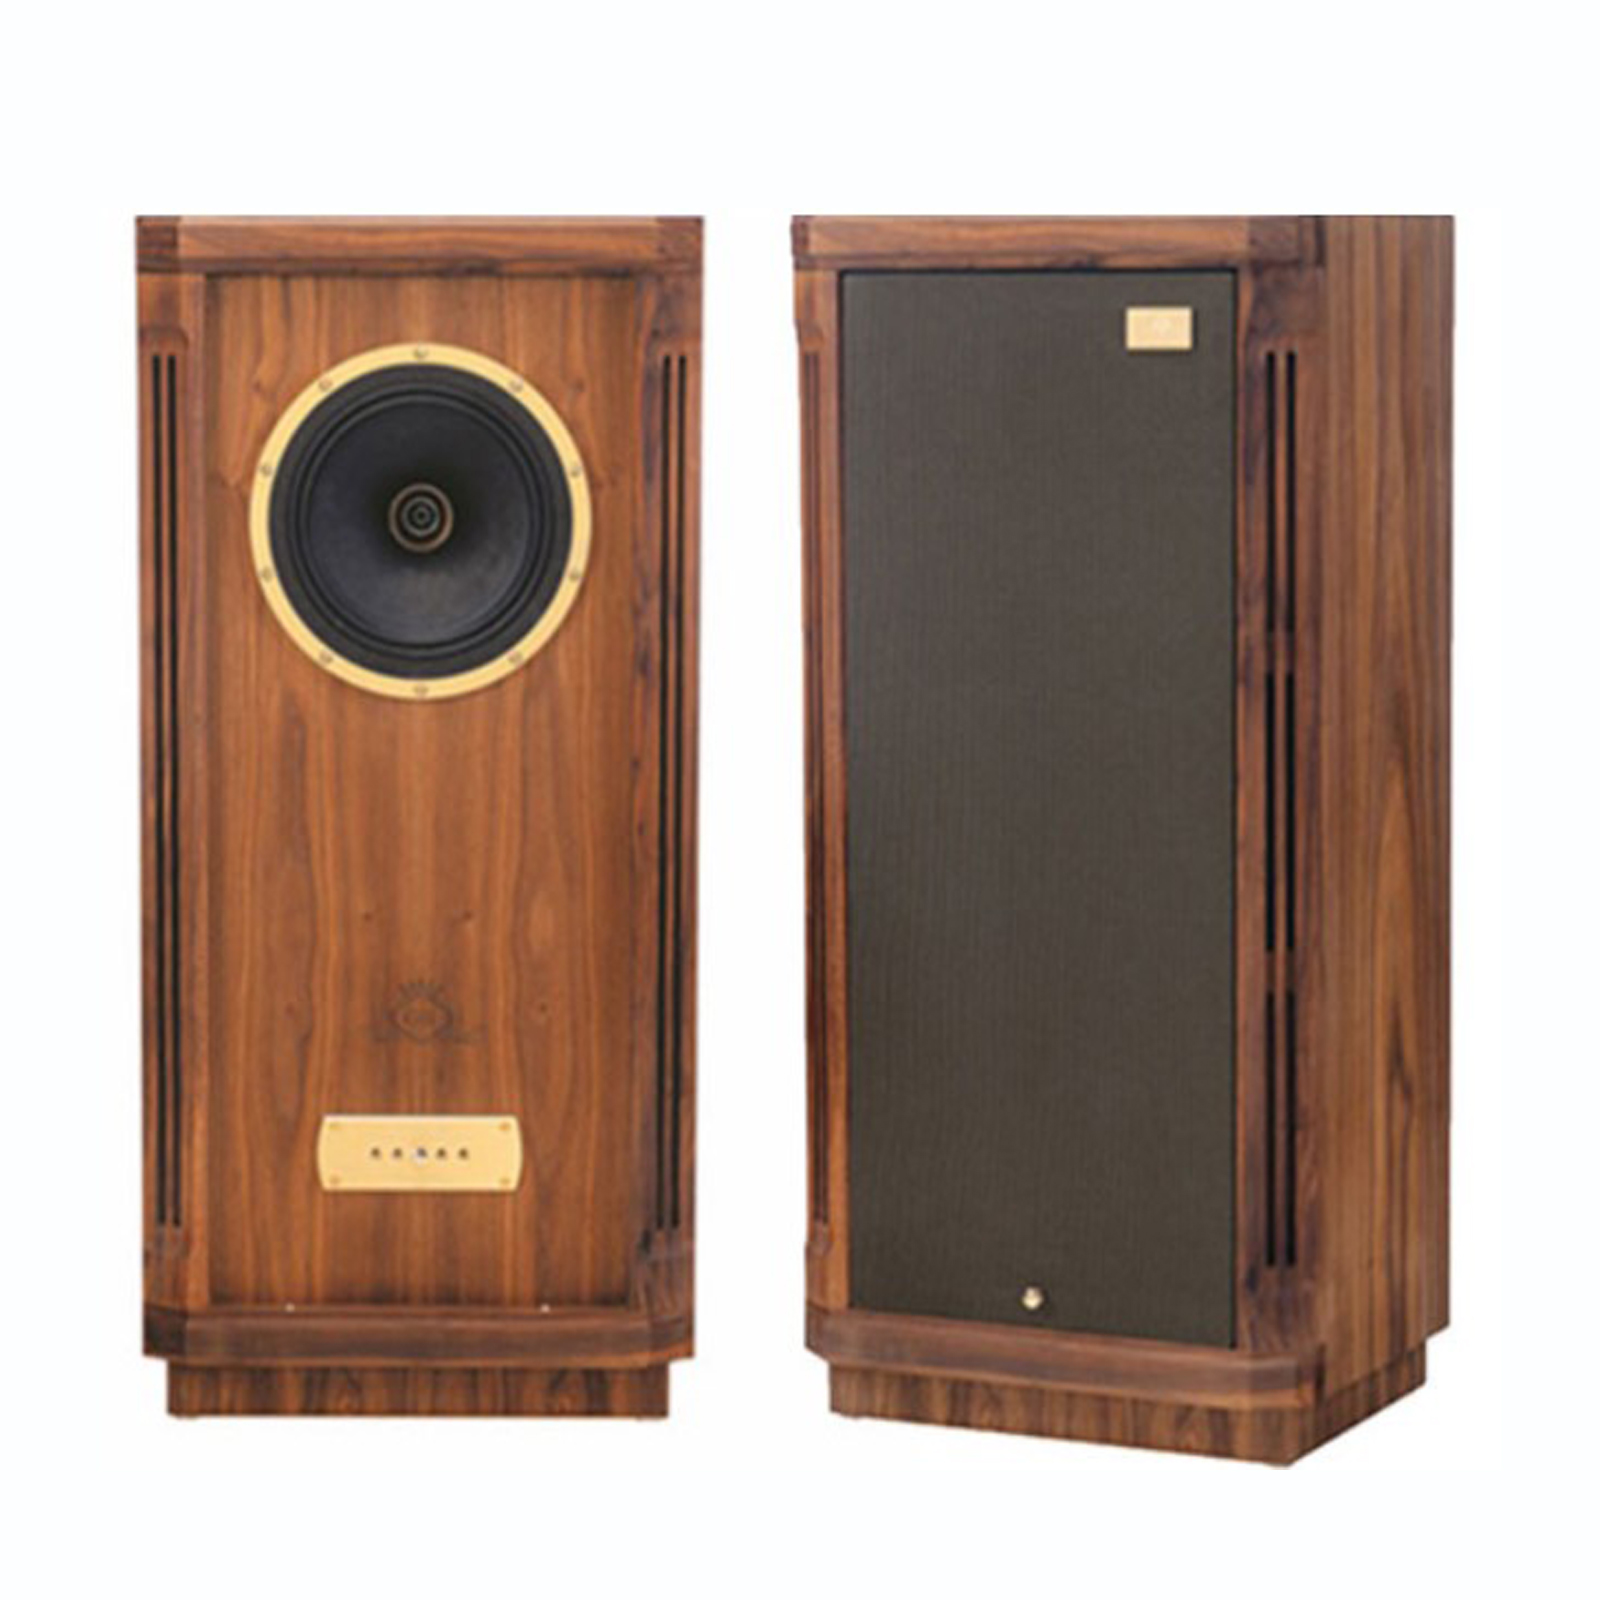 LOA TANNOY TURNBERRY GR